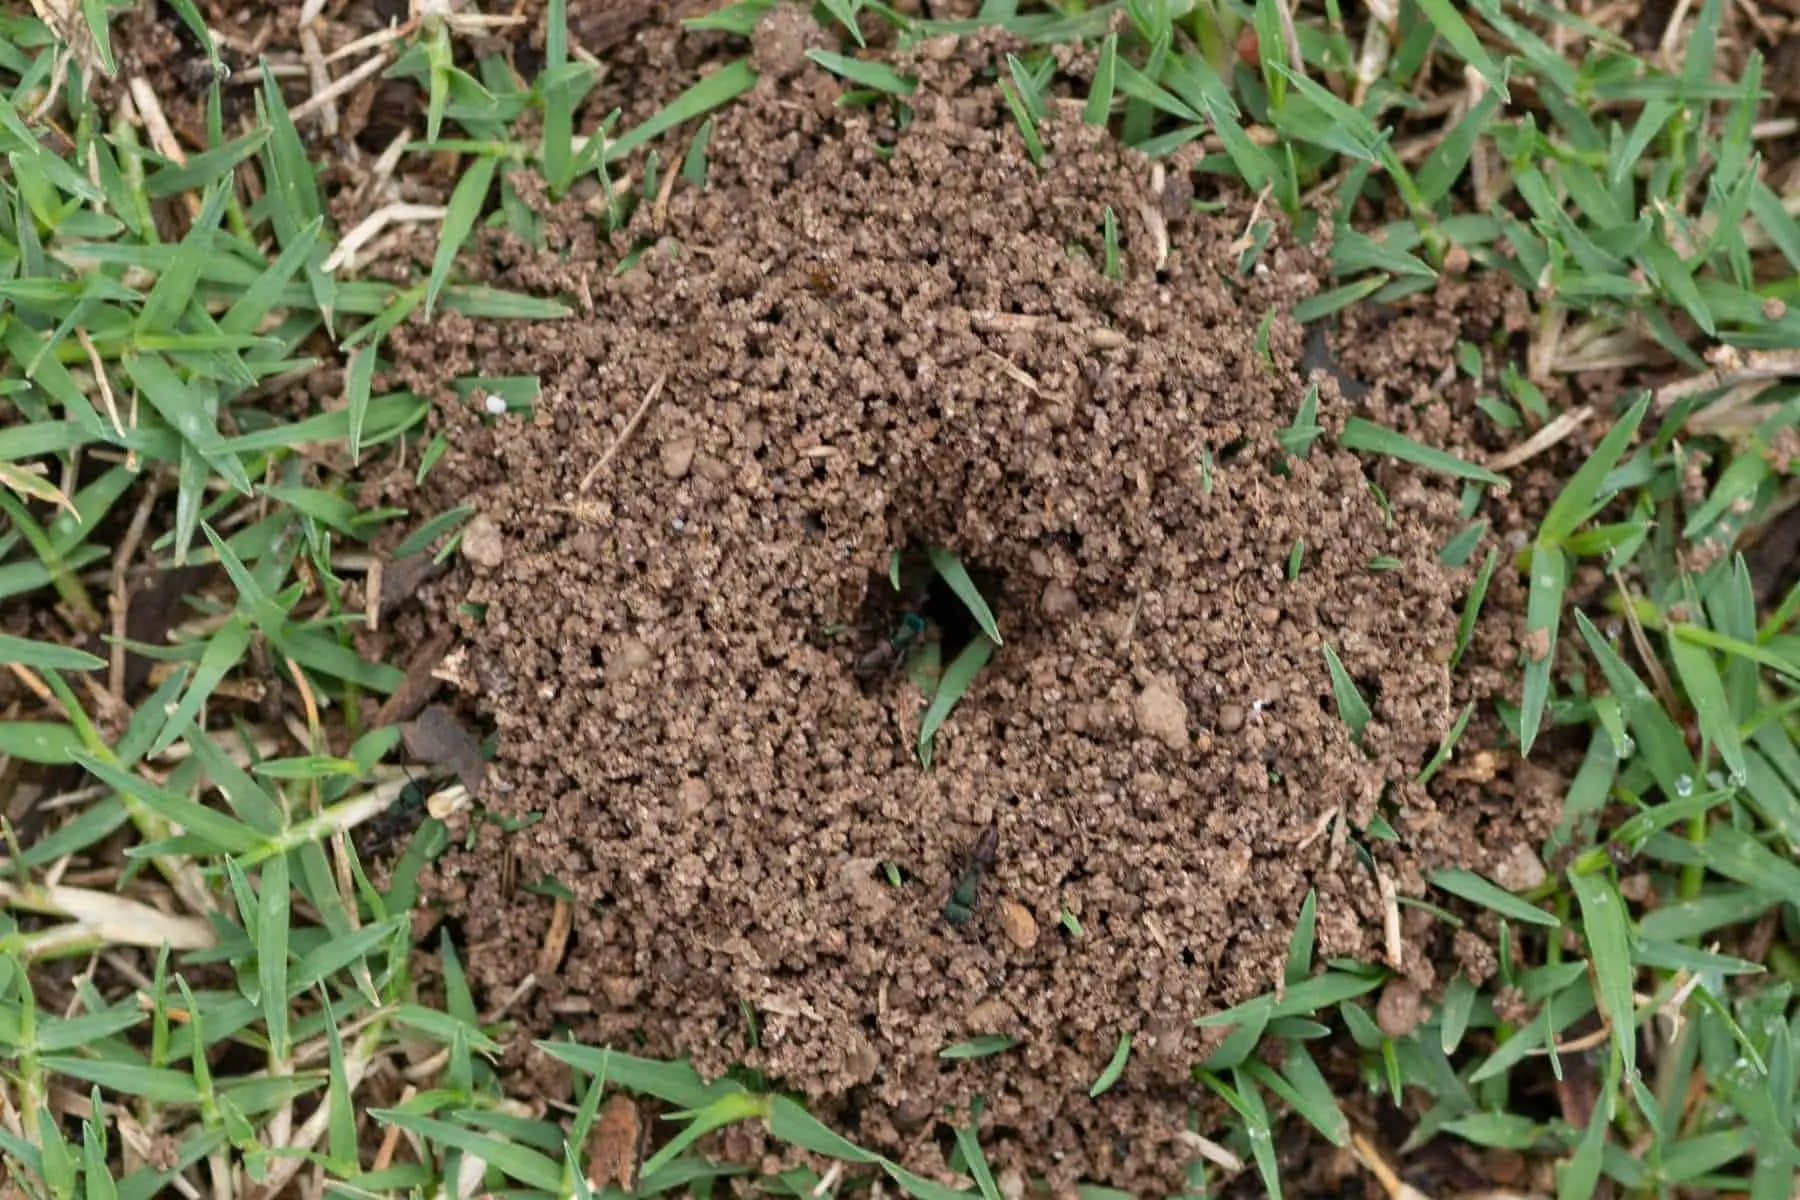 Ants In Garden Bed: How To Get Rid Of Them